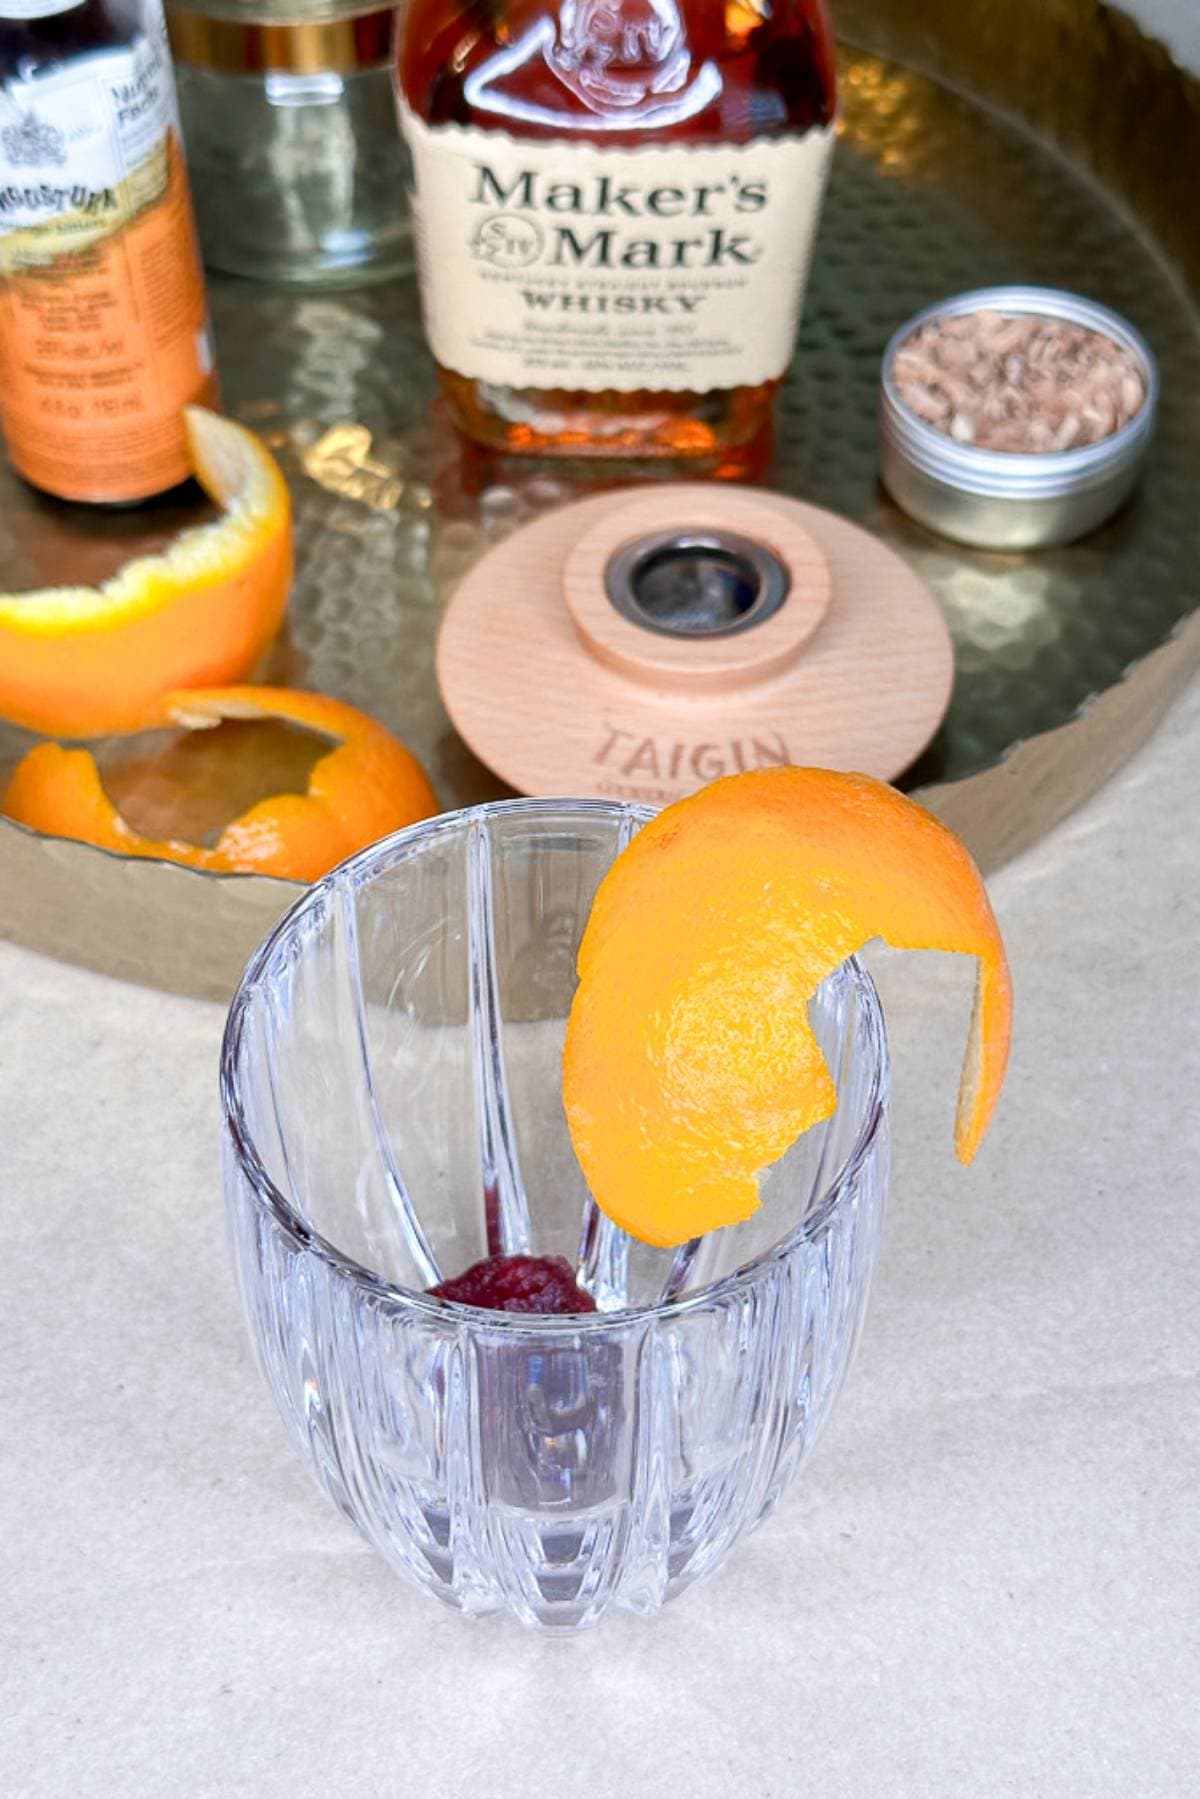 Rubbing the rim of a glass with orange peel for an old fashioned cocktail